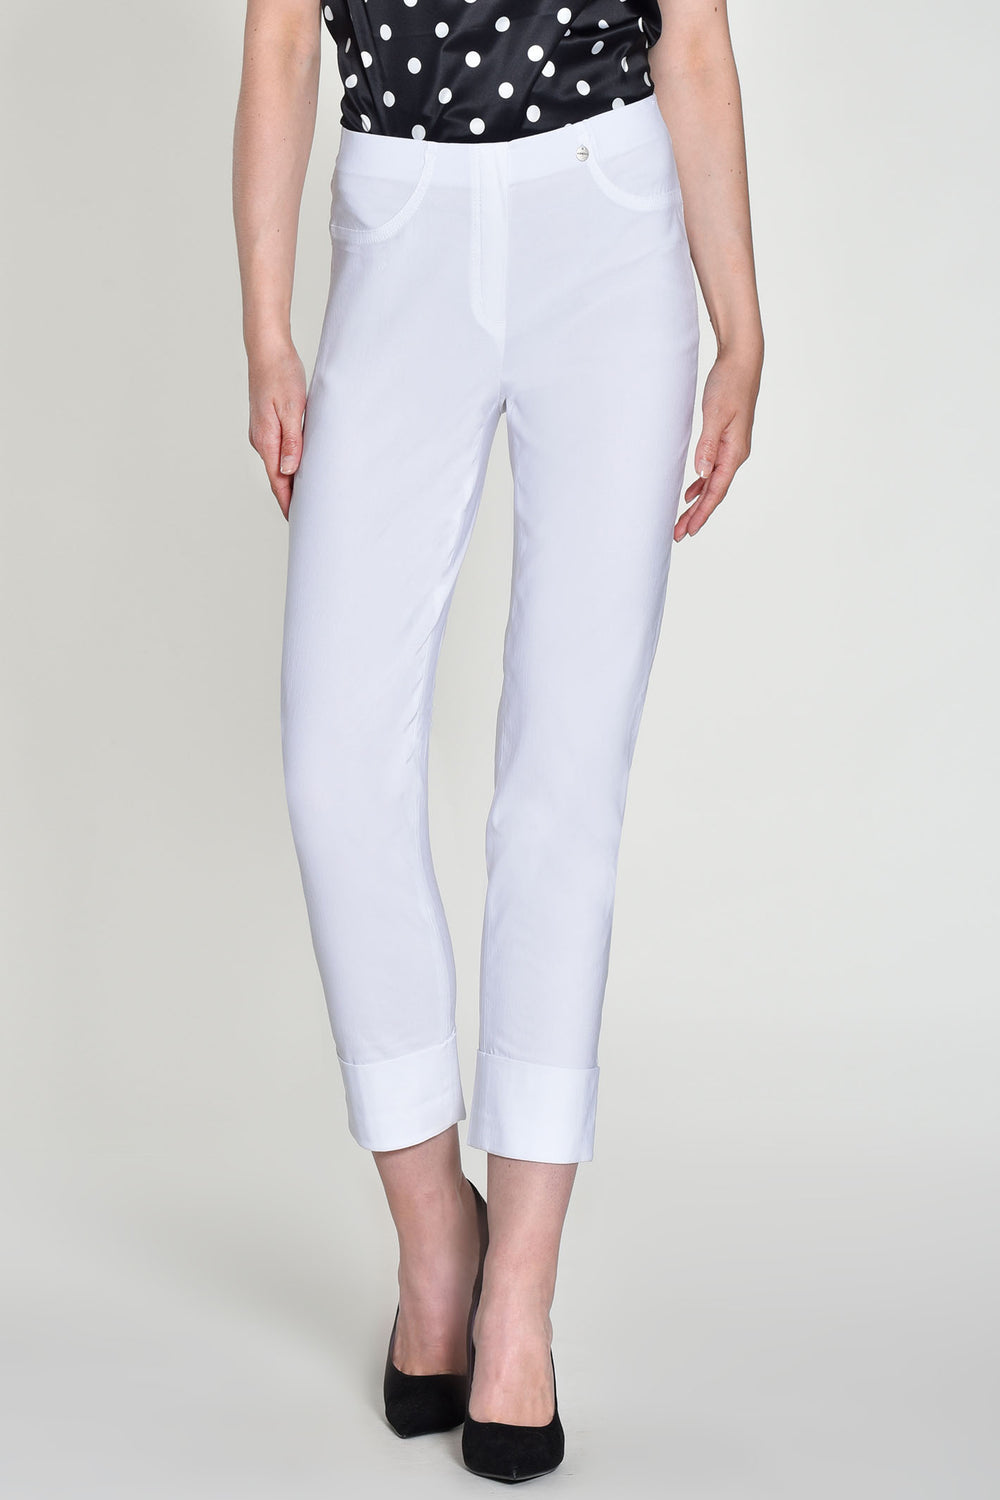 Robell 51568 10 Bella 09 White Cropped Trousers 68cm - Experience Boutique